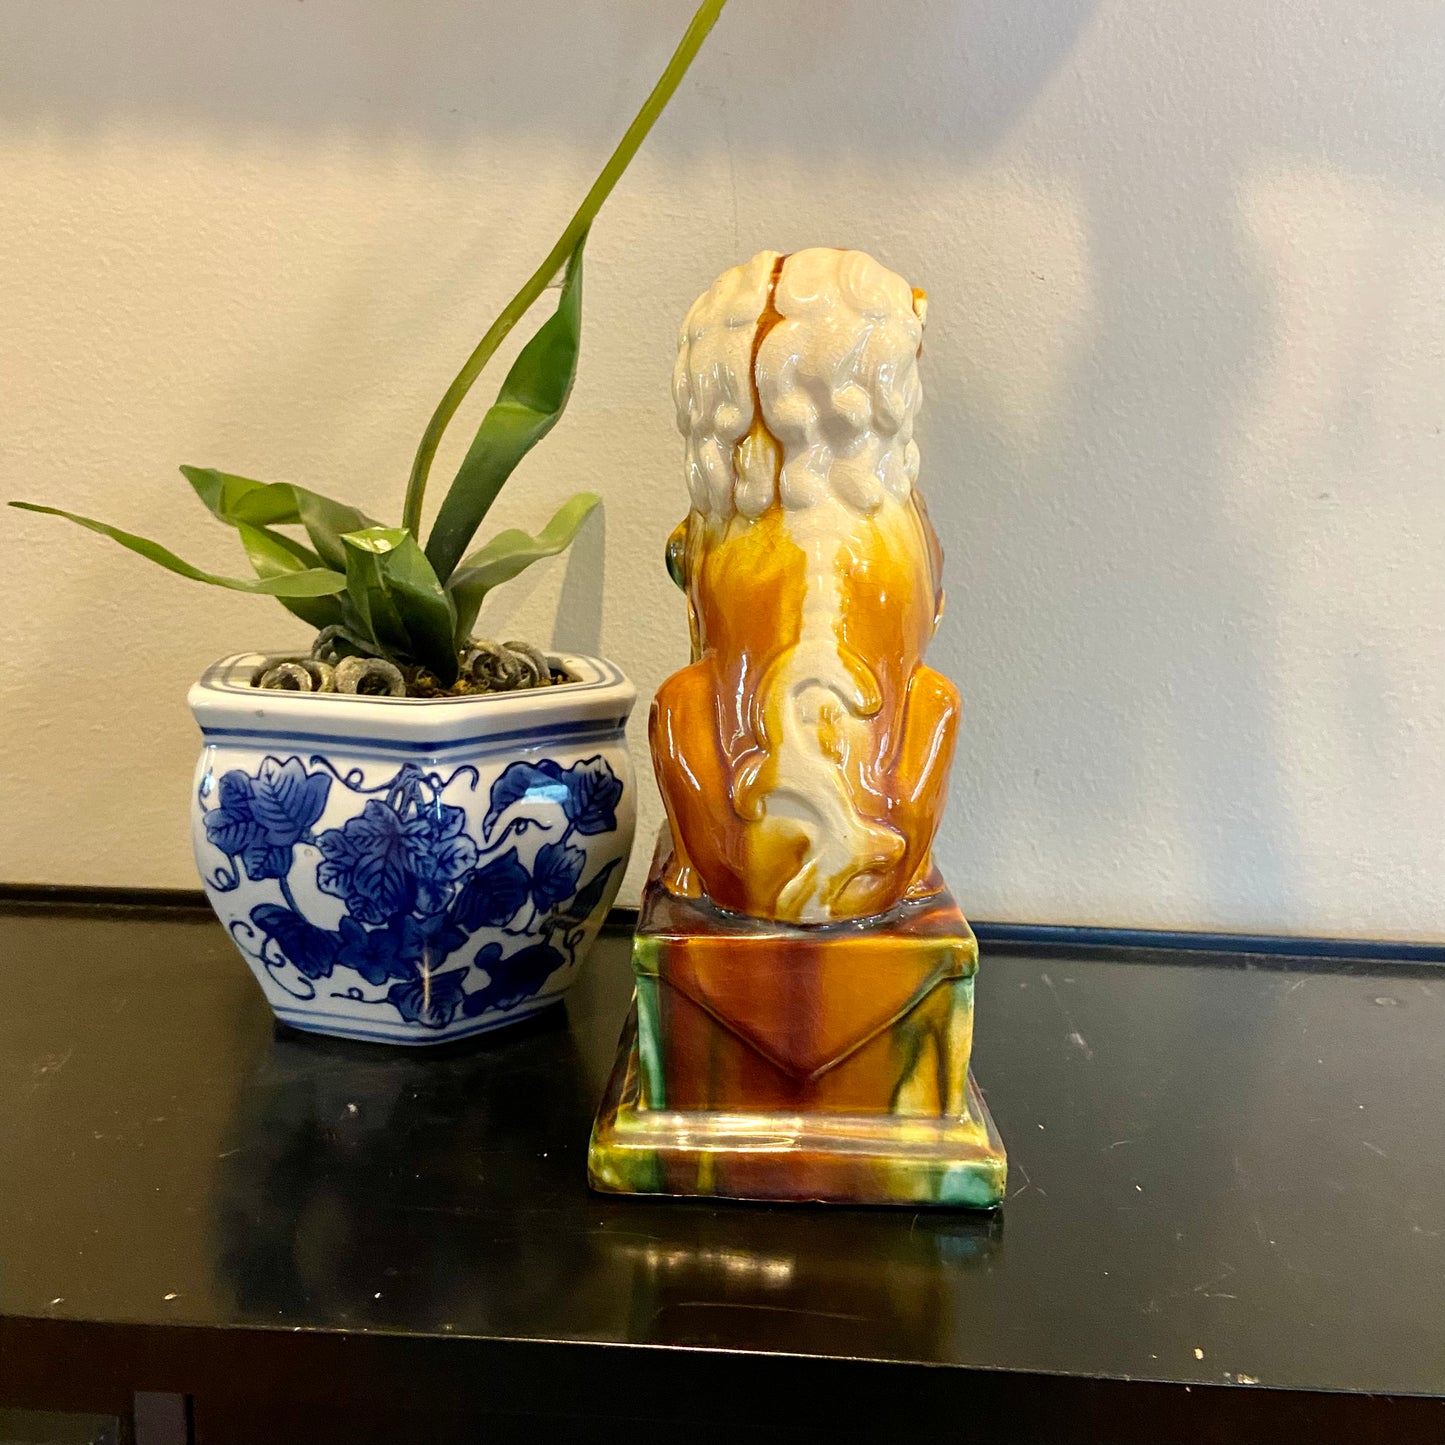 Vintage chinoiserie chic foo dog dragon statue or bookend 9.75 x 5.75 x 4.5 - pristine!